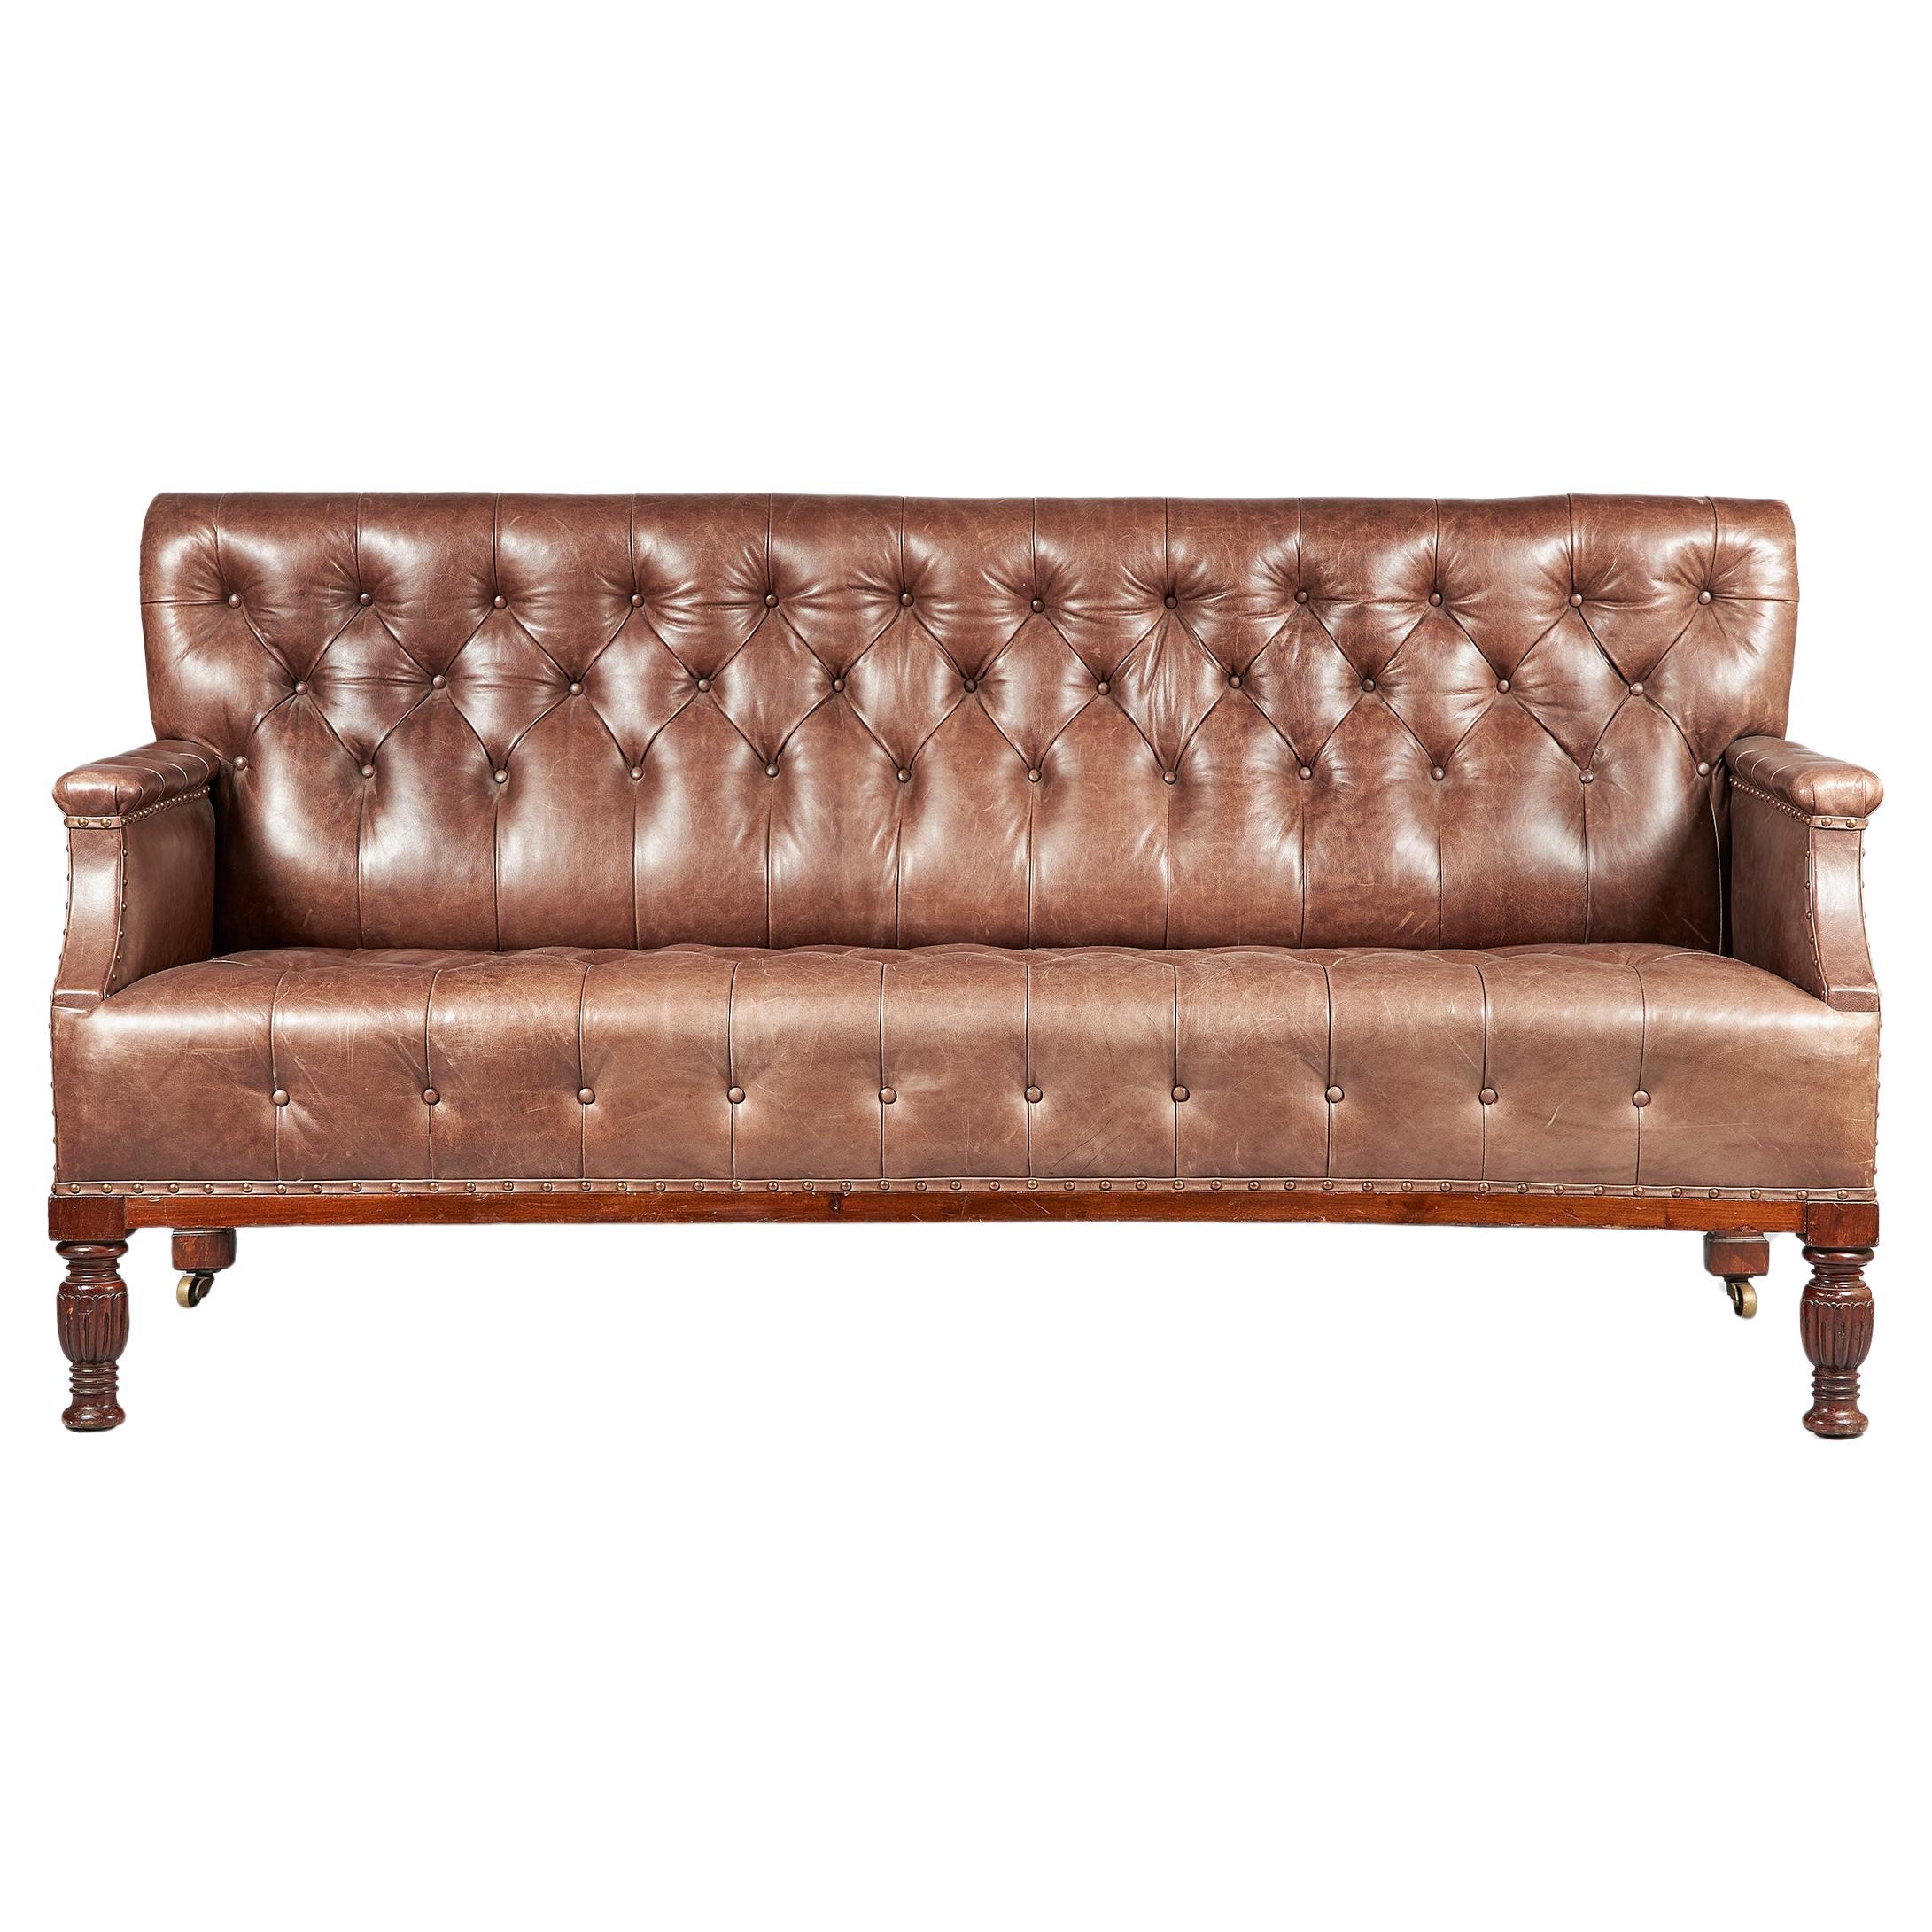 George IV Leather Club Sofa, Early 19th Century For Sale